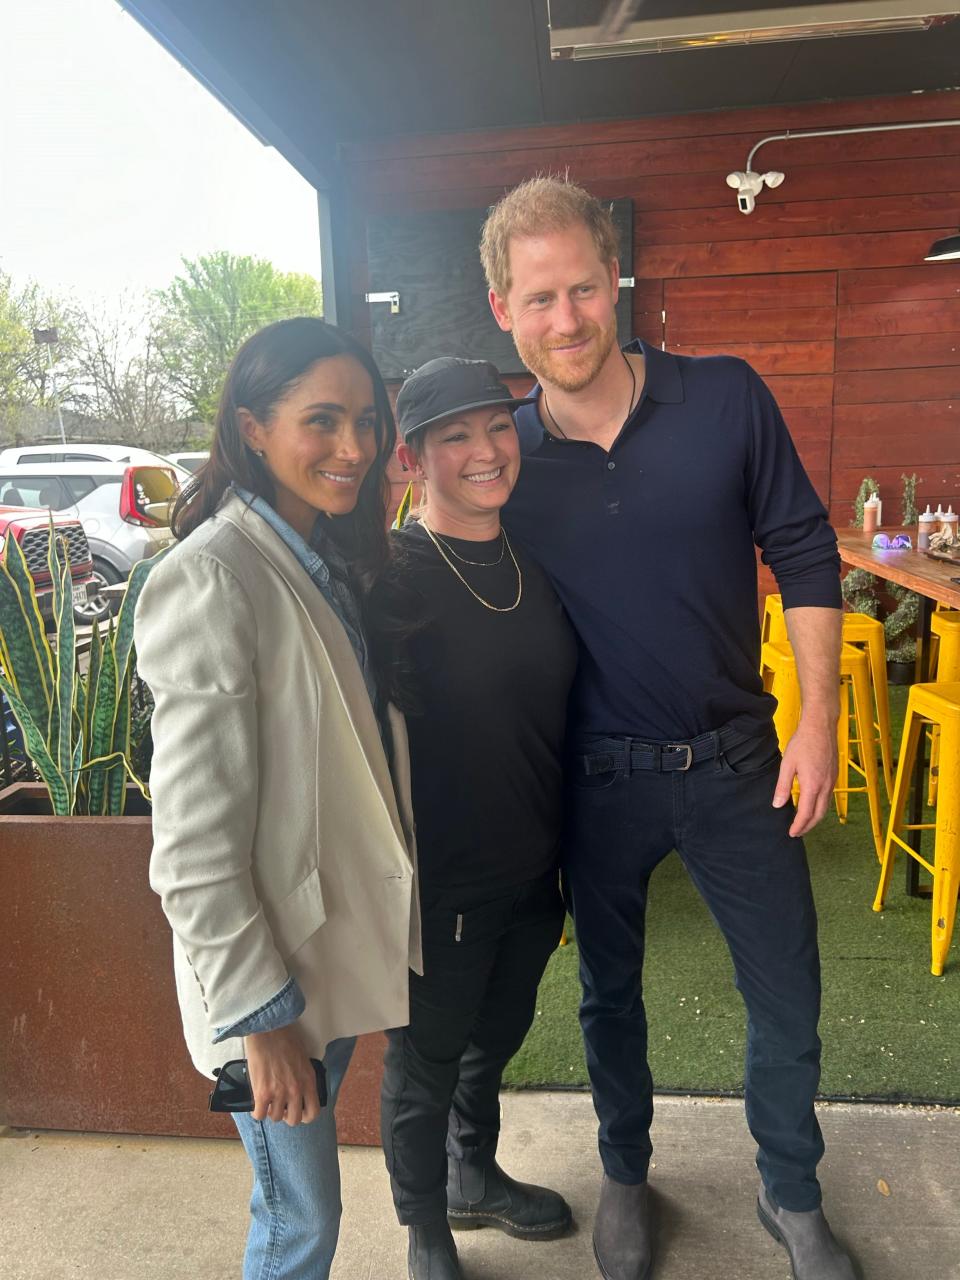 Prince Harry and Meghan Markle visited La Barbecue in Austin and posed for a photo with owner Ali Clem.